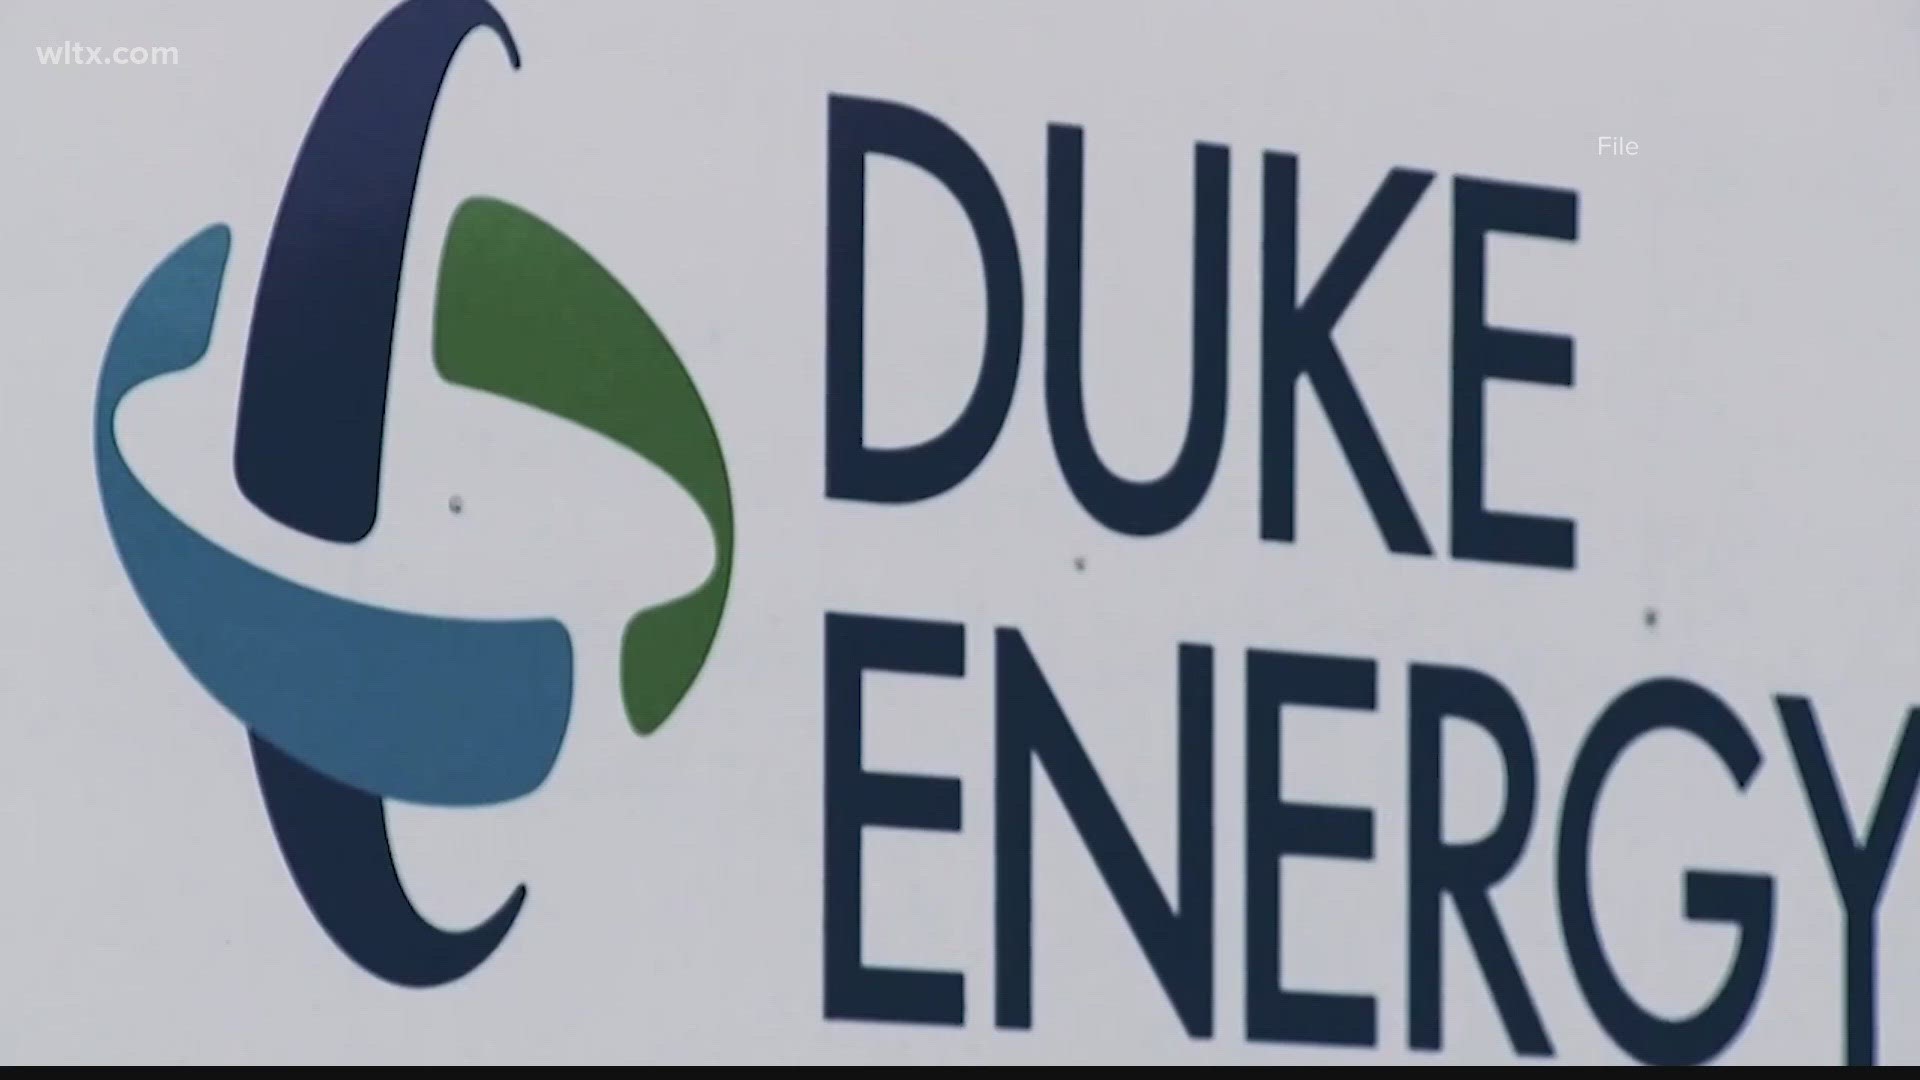 The city's department of public utilities say they will now be purchasing from Duke and no longer working with Dominion.